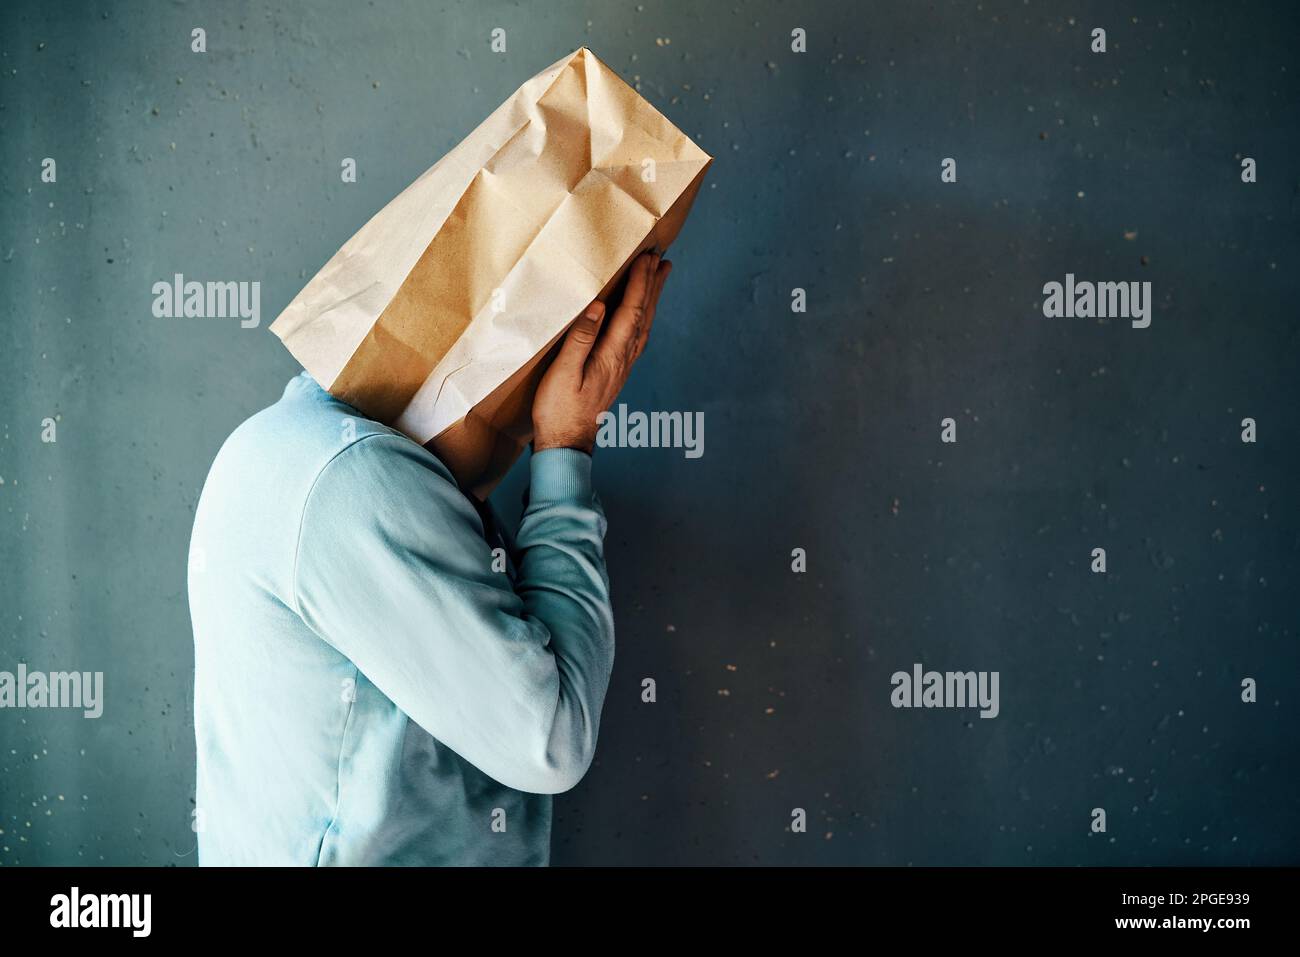 Upset man with a paper bag on head covering eyes with both hands. Profile view, copy space. People emotion concept Stock Photo